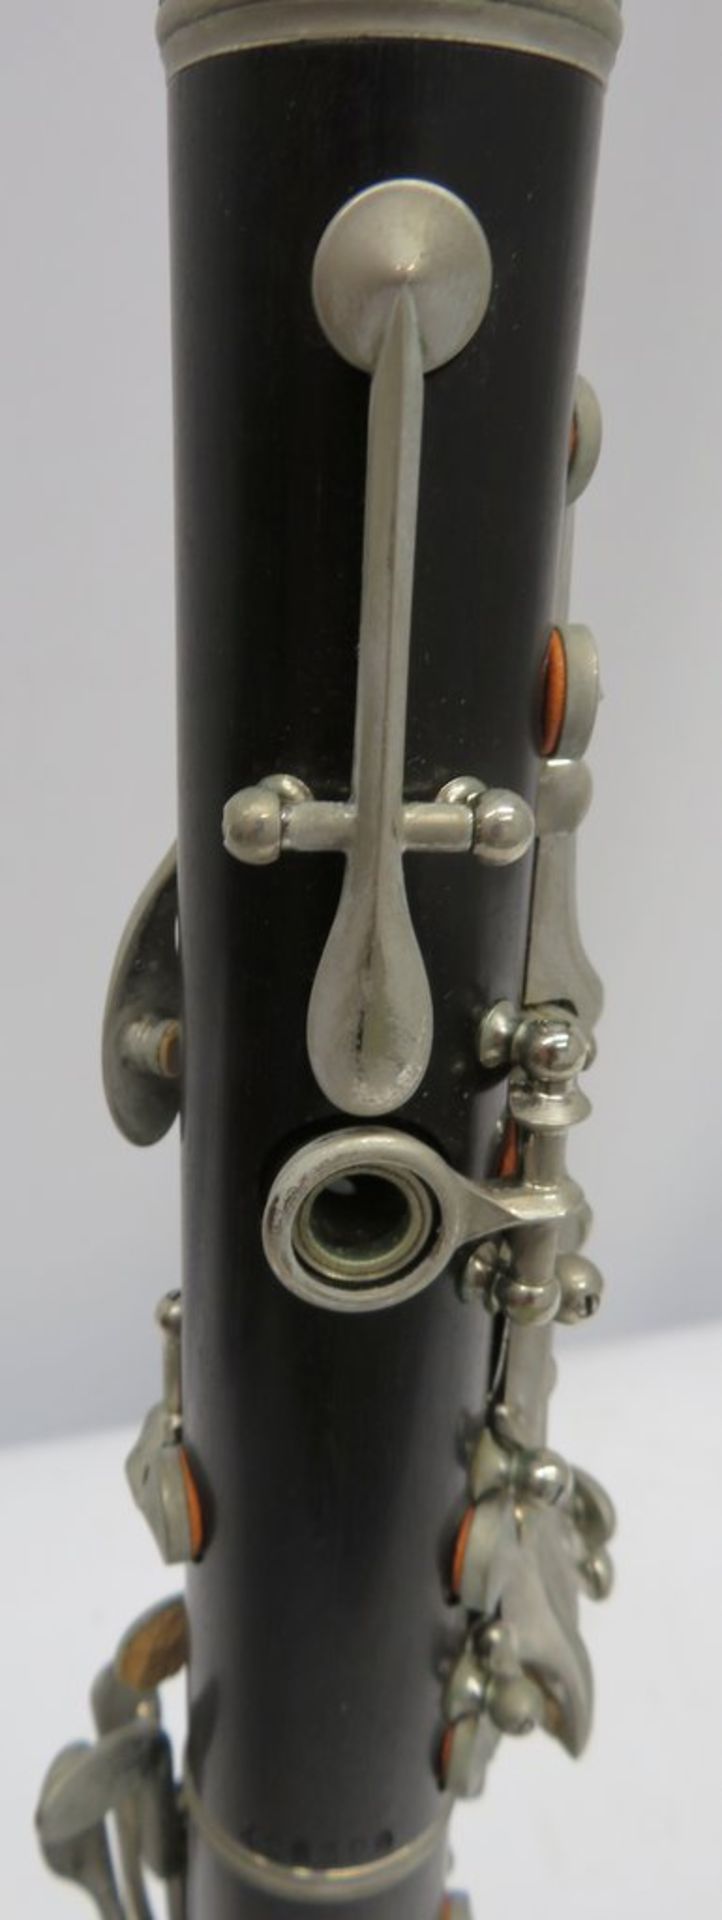 Buffet Crampon E Flat Clarinet With Case. Serial Number: 406320. Full length 42cm Please - Image 19 of 22